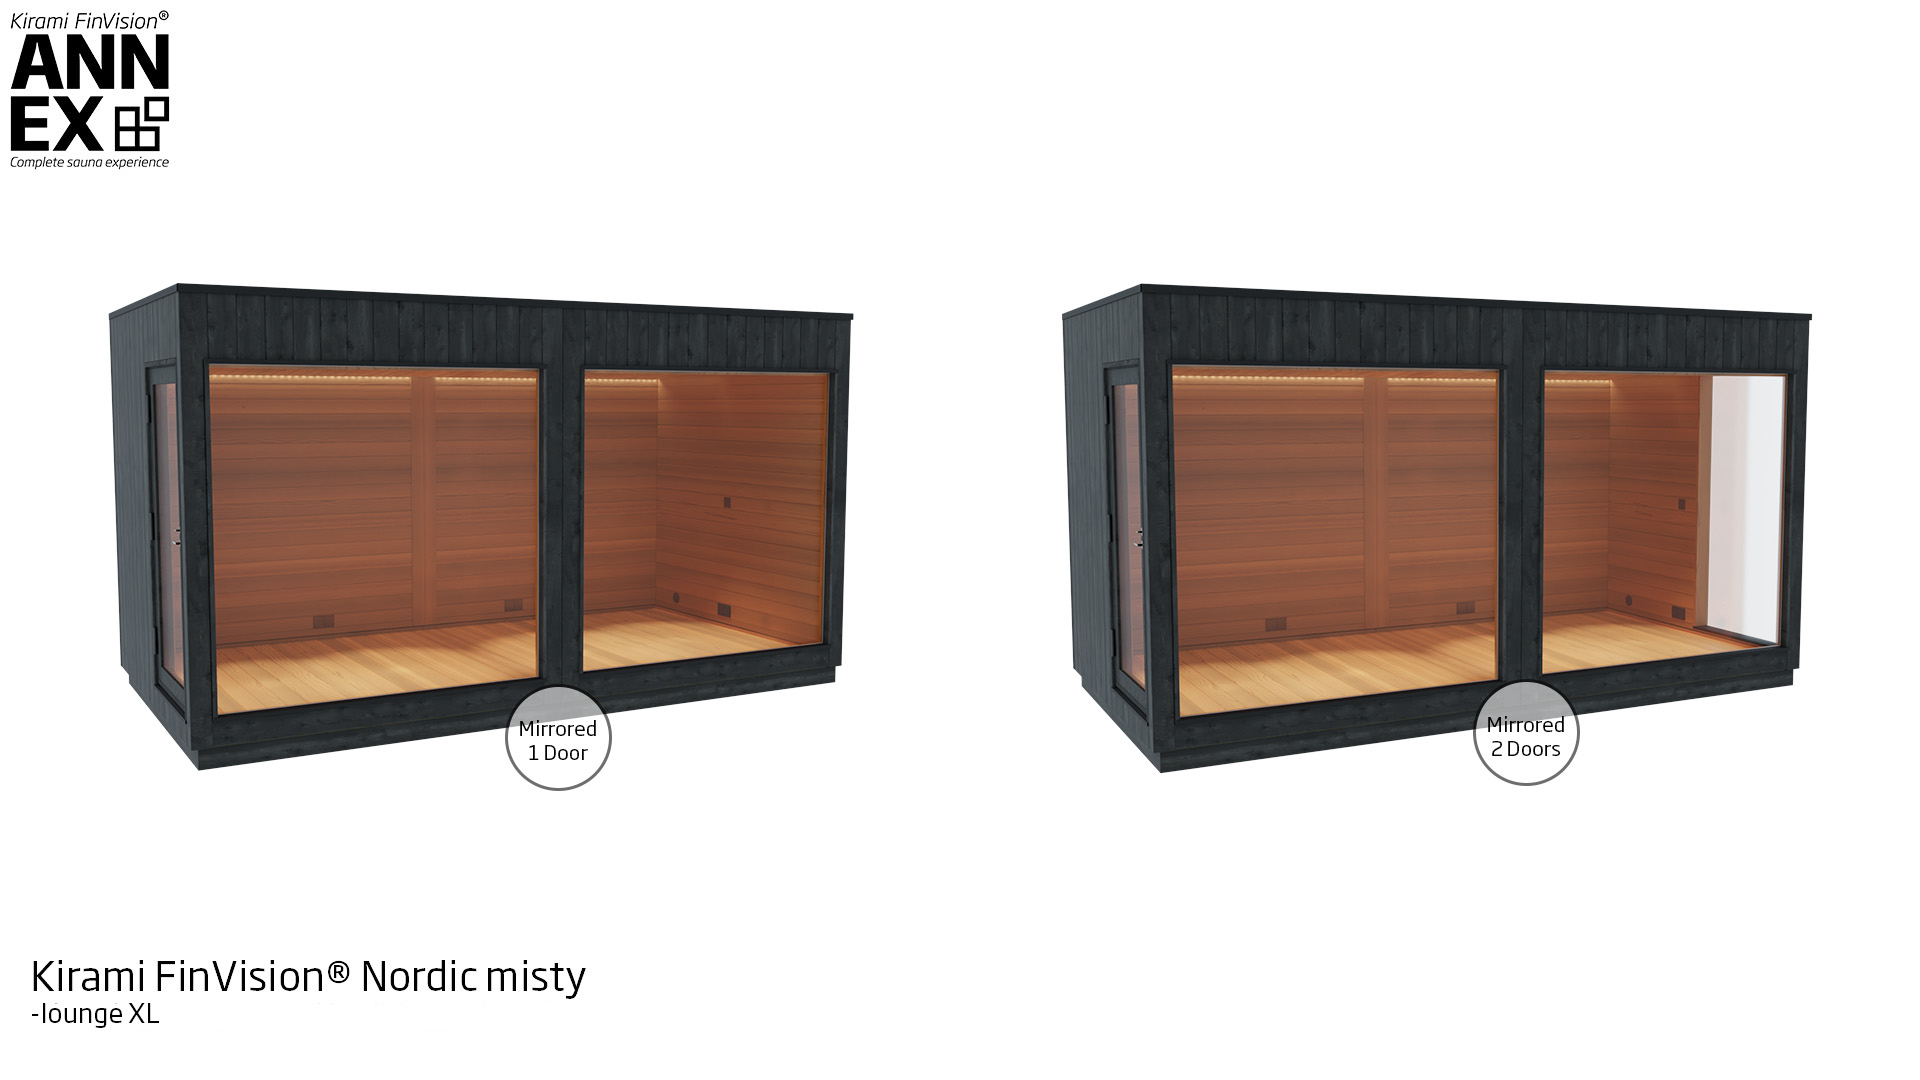 Kirami FinVision® -lounge XL Nordic misty with mirored 1 door or mirrored 2 door | Kirami FinVision® Annex